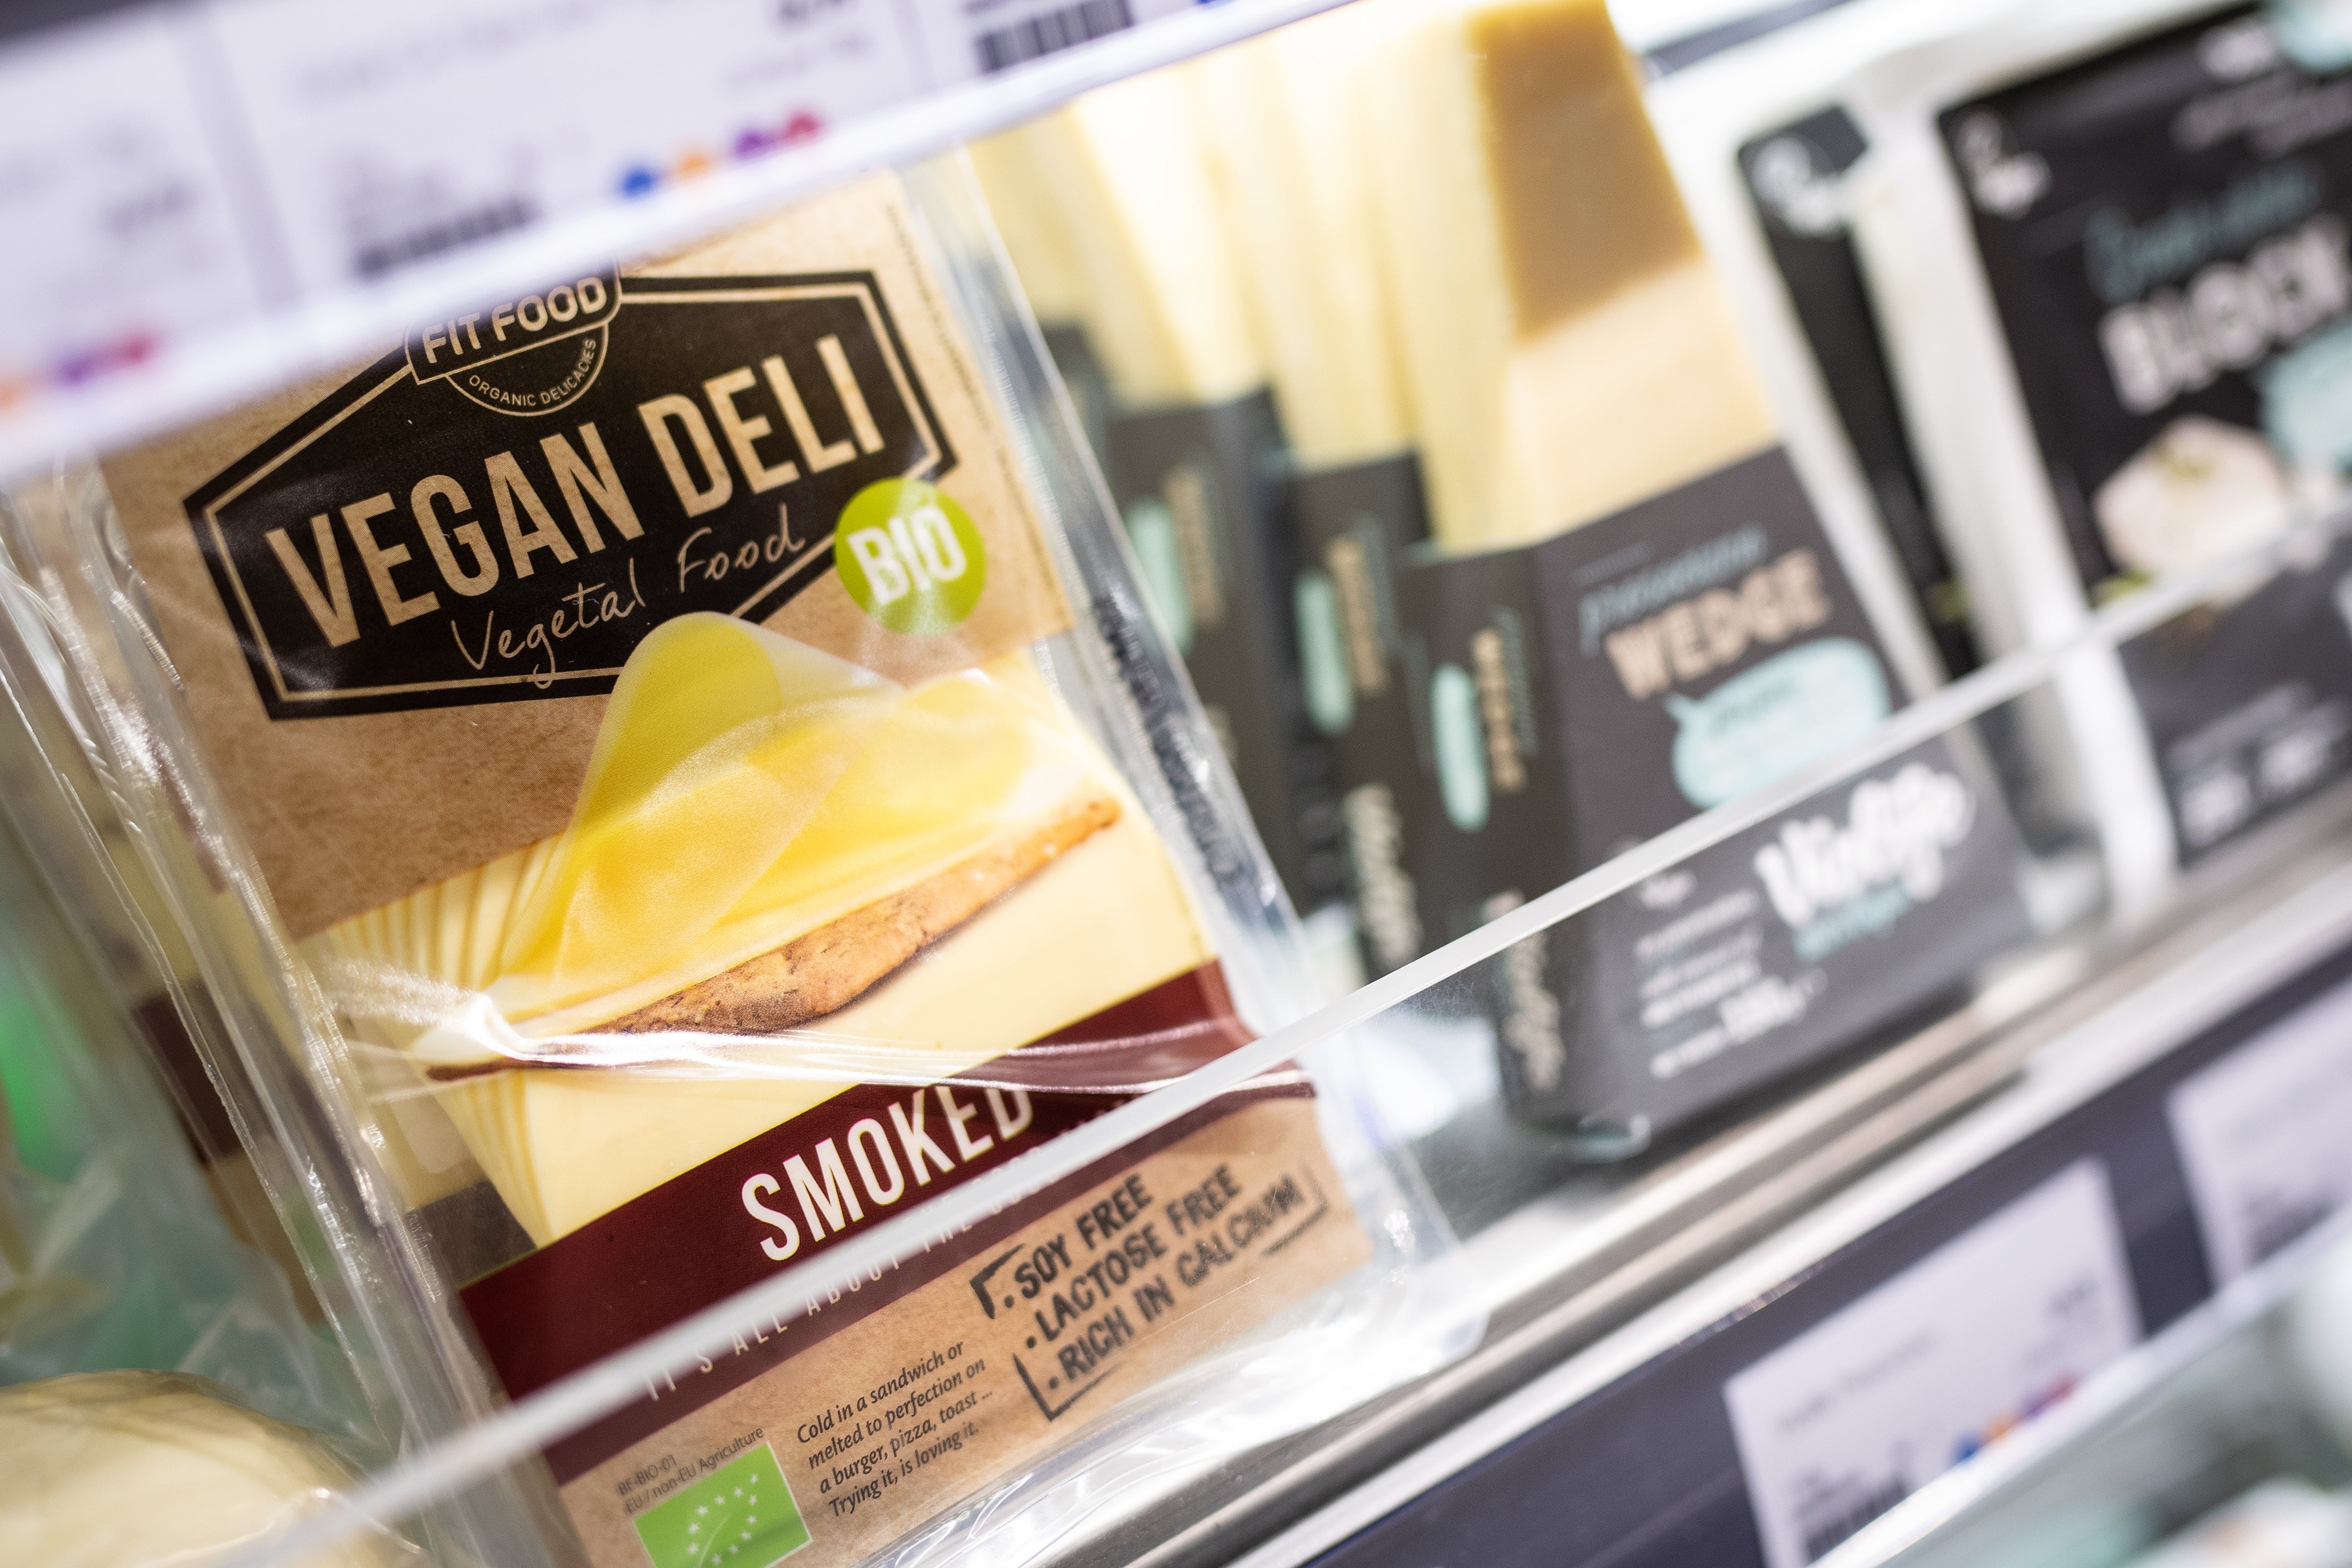 Vegan smoked cheese substitute is seen in a branch of the Planet Organic healthfood store